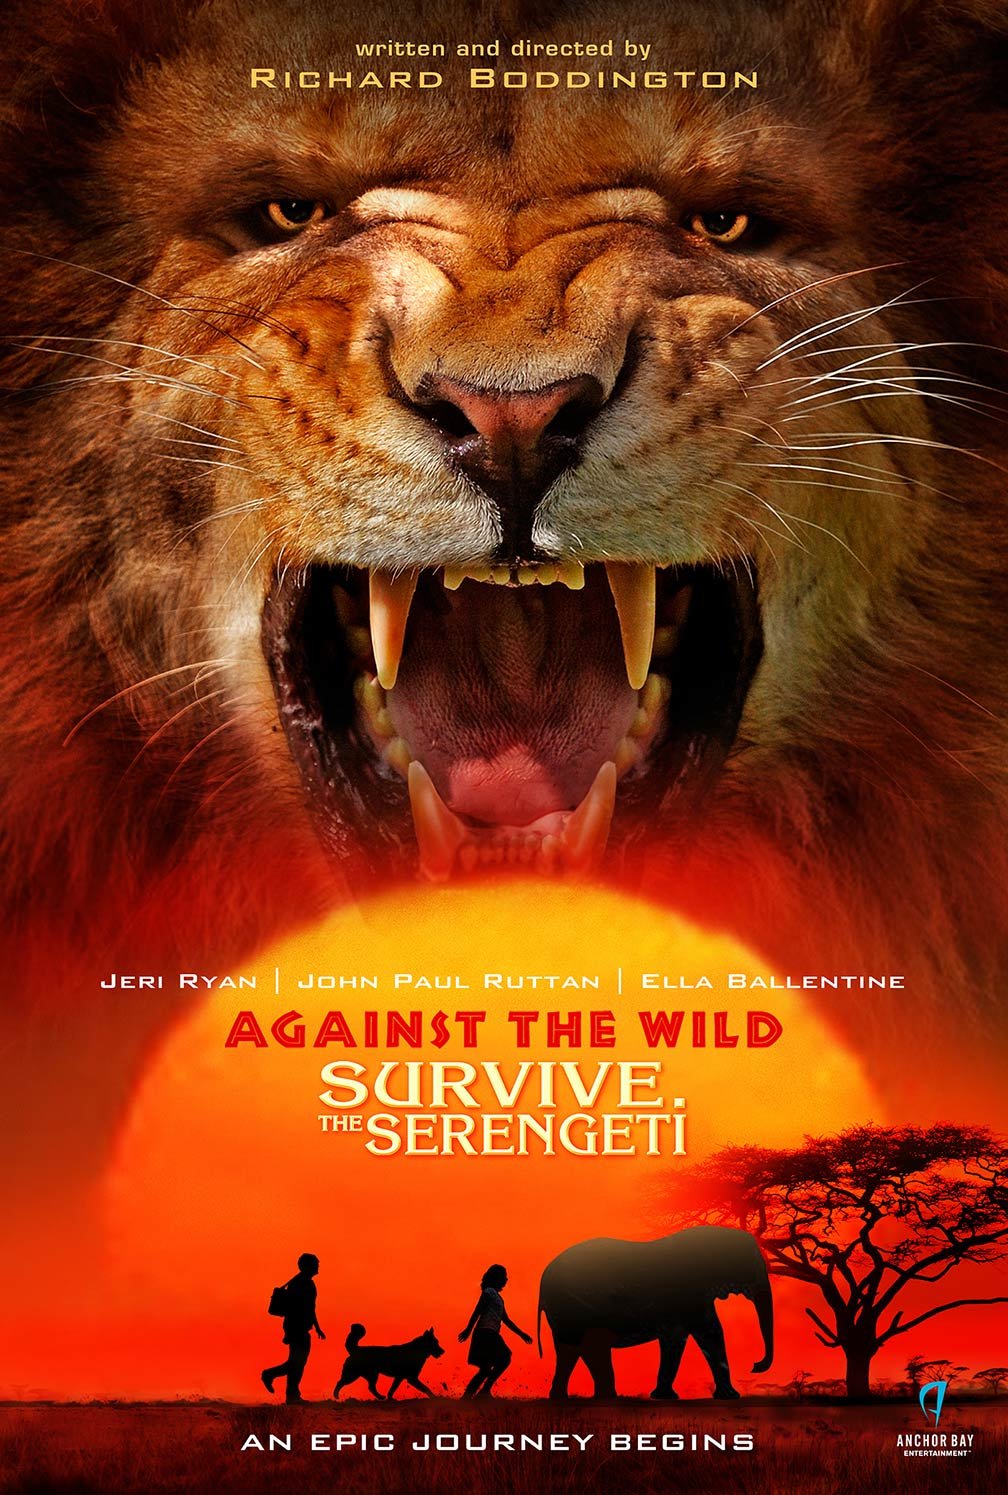 Poster of the movie Against the Wild 2: Survive the Serengeti